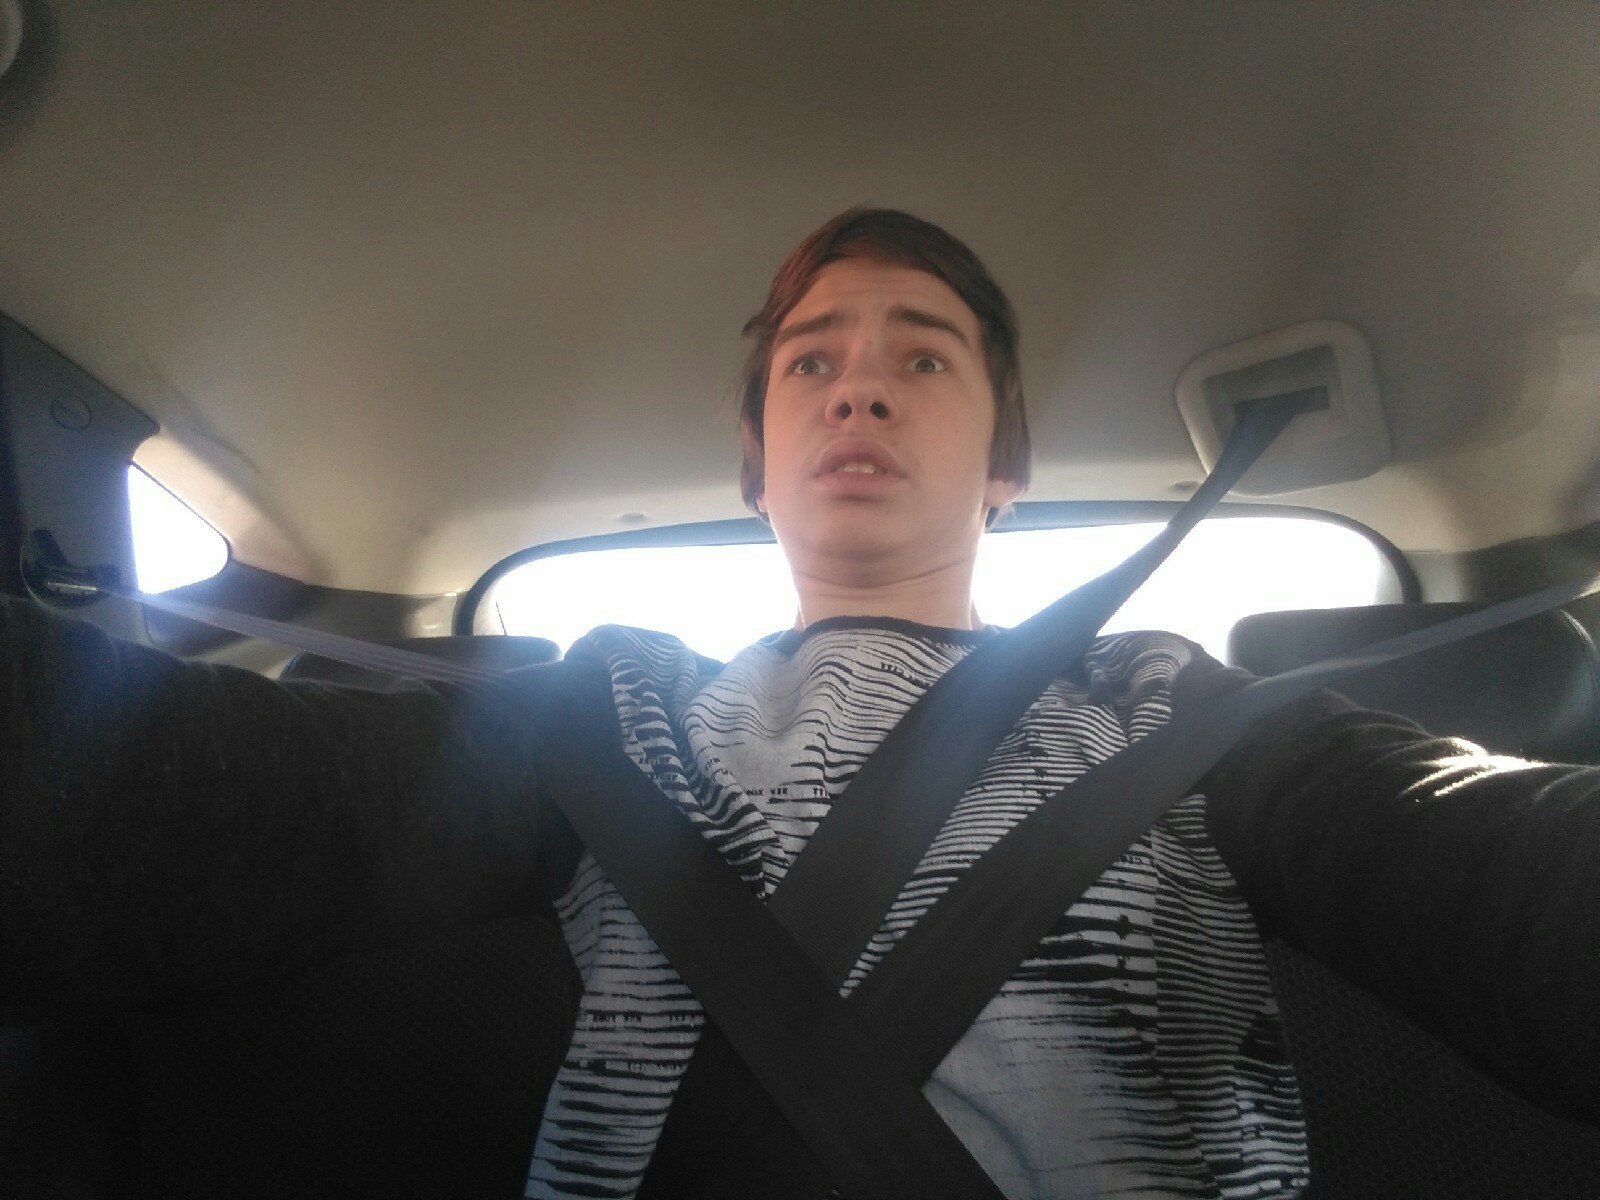 When you told the taxi driver you were late - Humor, Picture with text, My